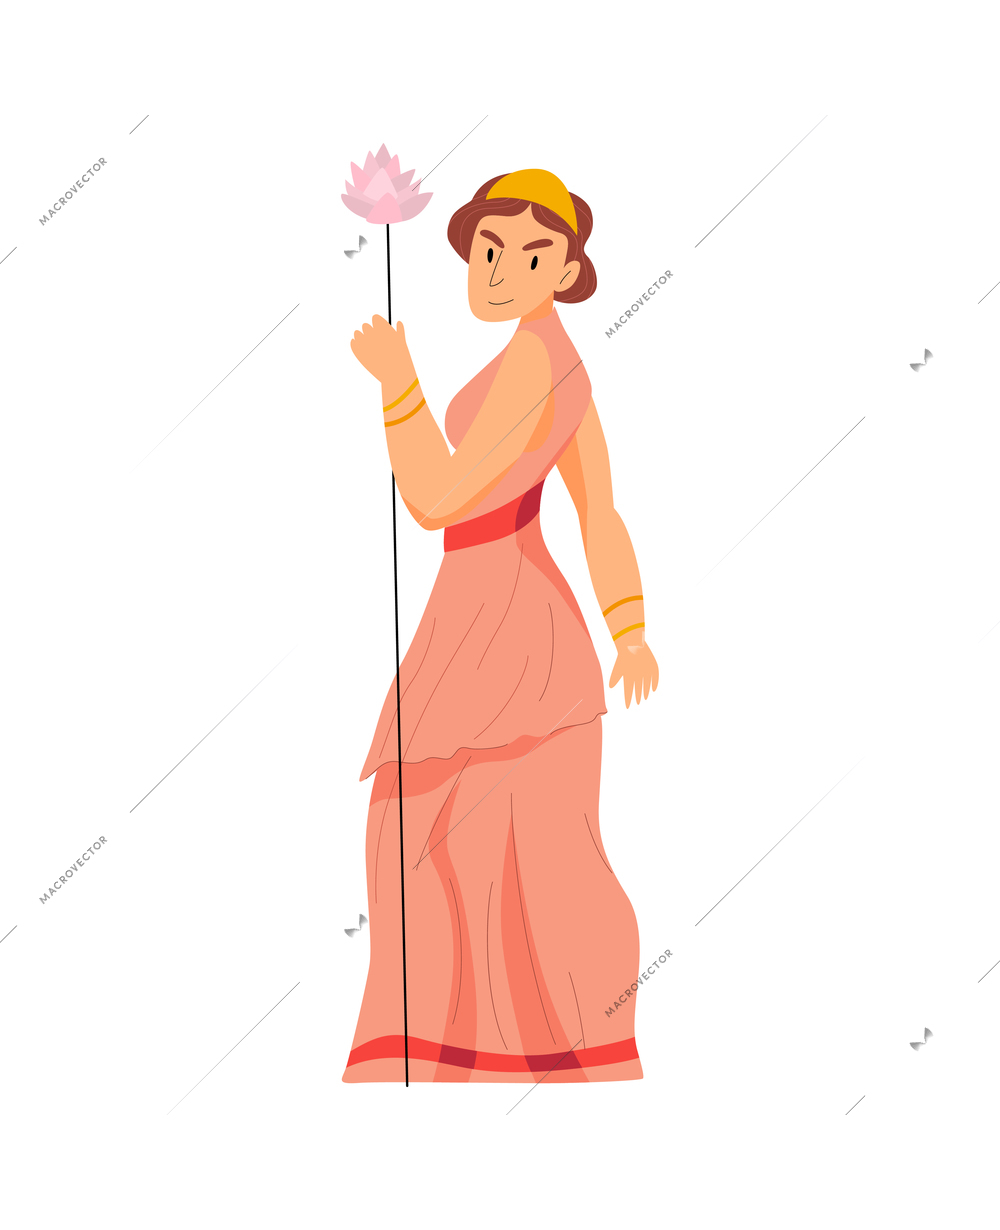 Greek god composition with isolated human character of ancient mythological character on blank background vector illustration